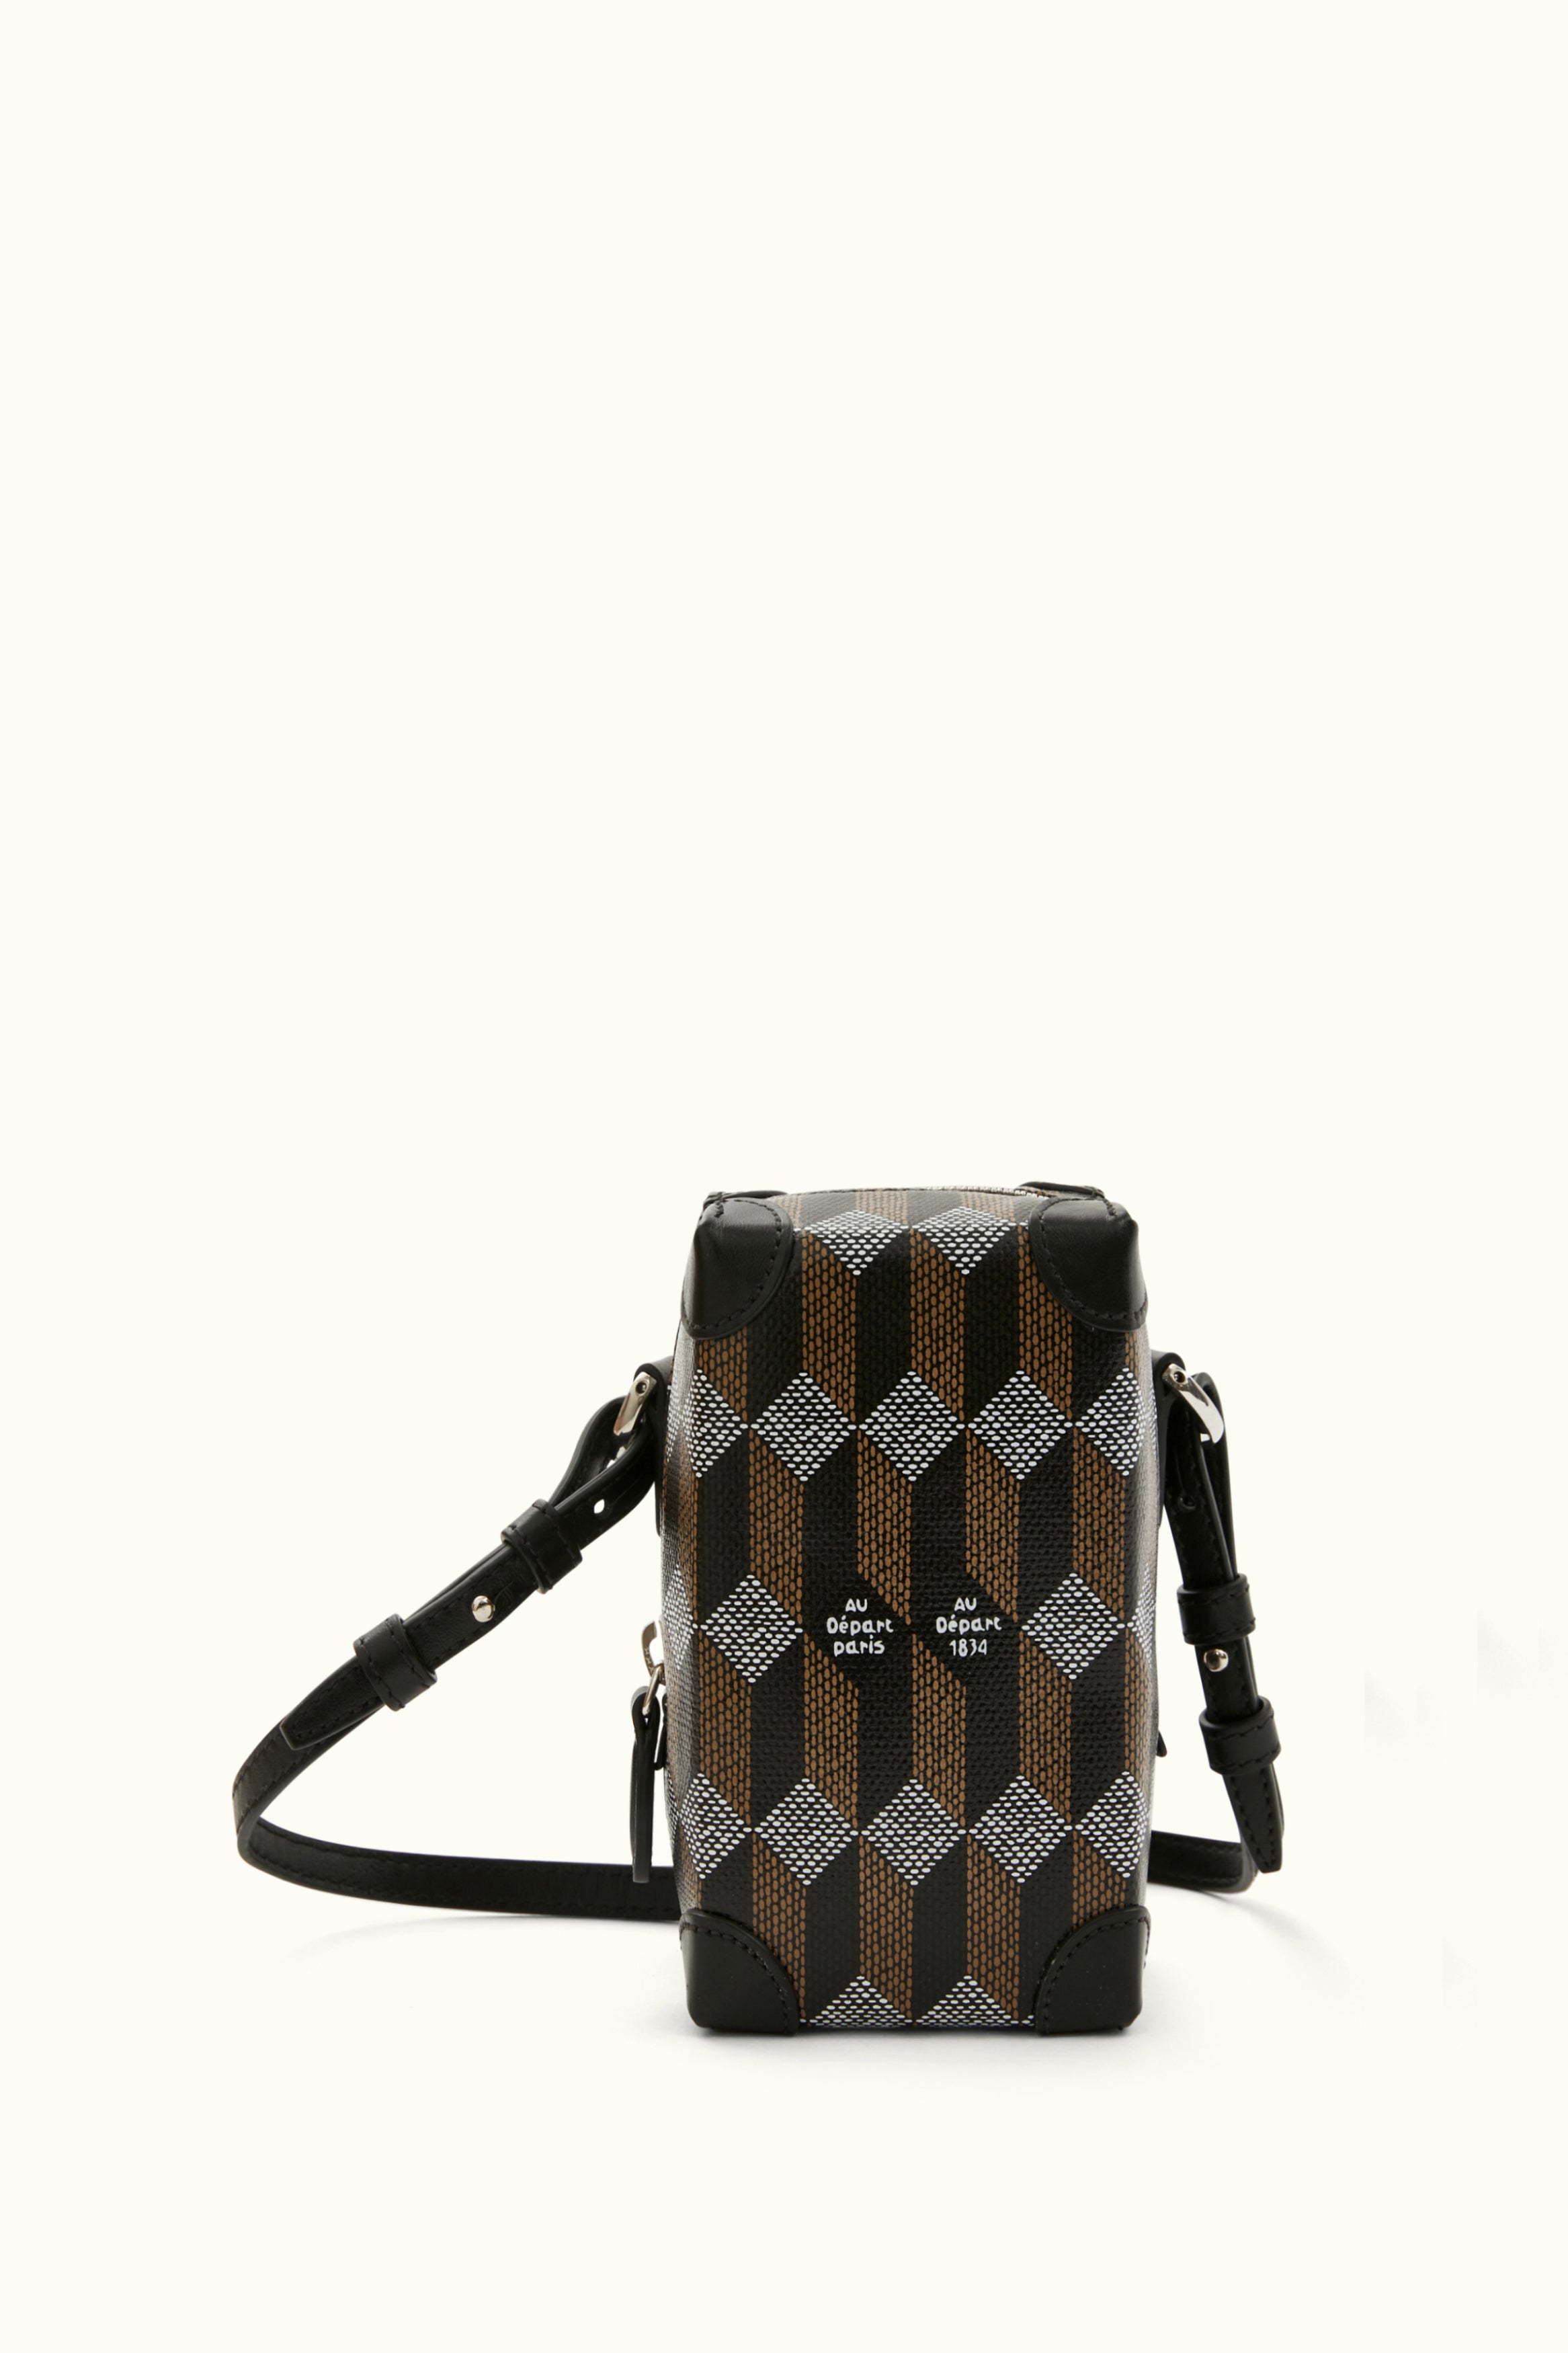 Louis Vuitton on X: A trunk for everyday. The Mini Soft Trunk is